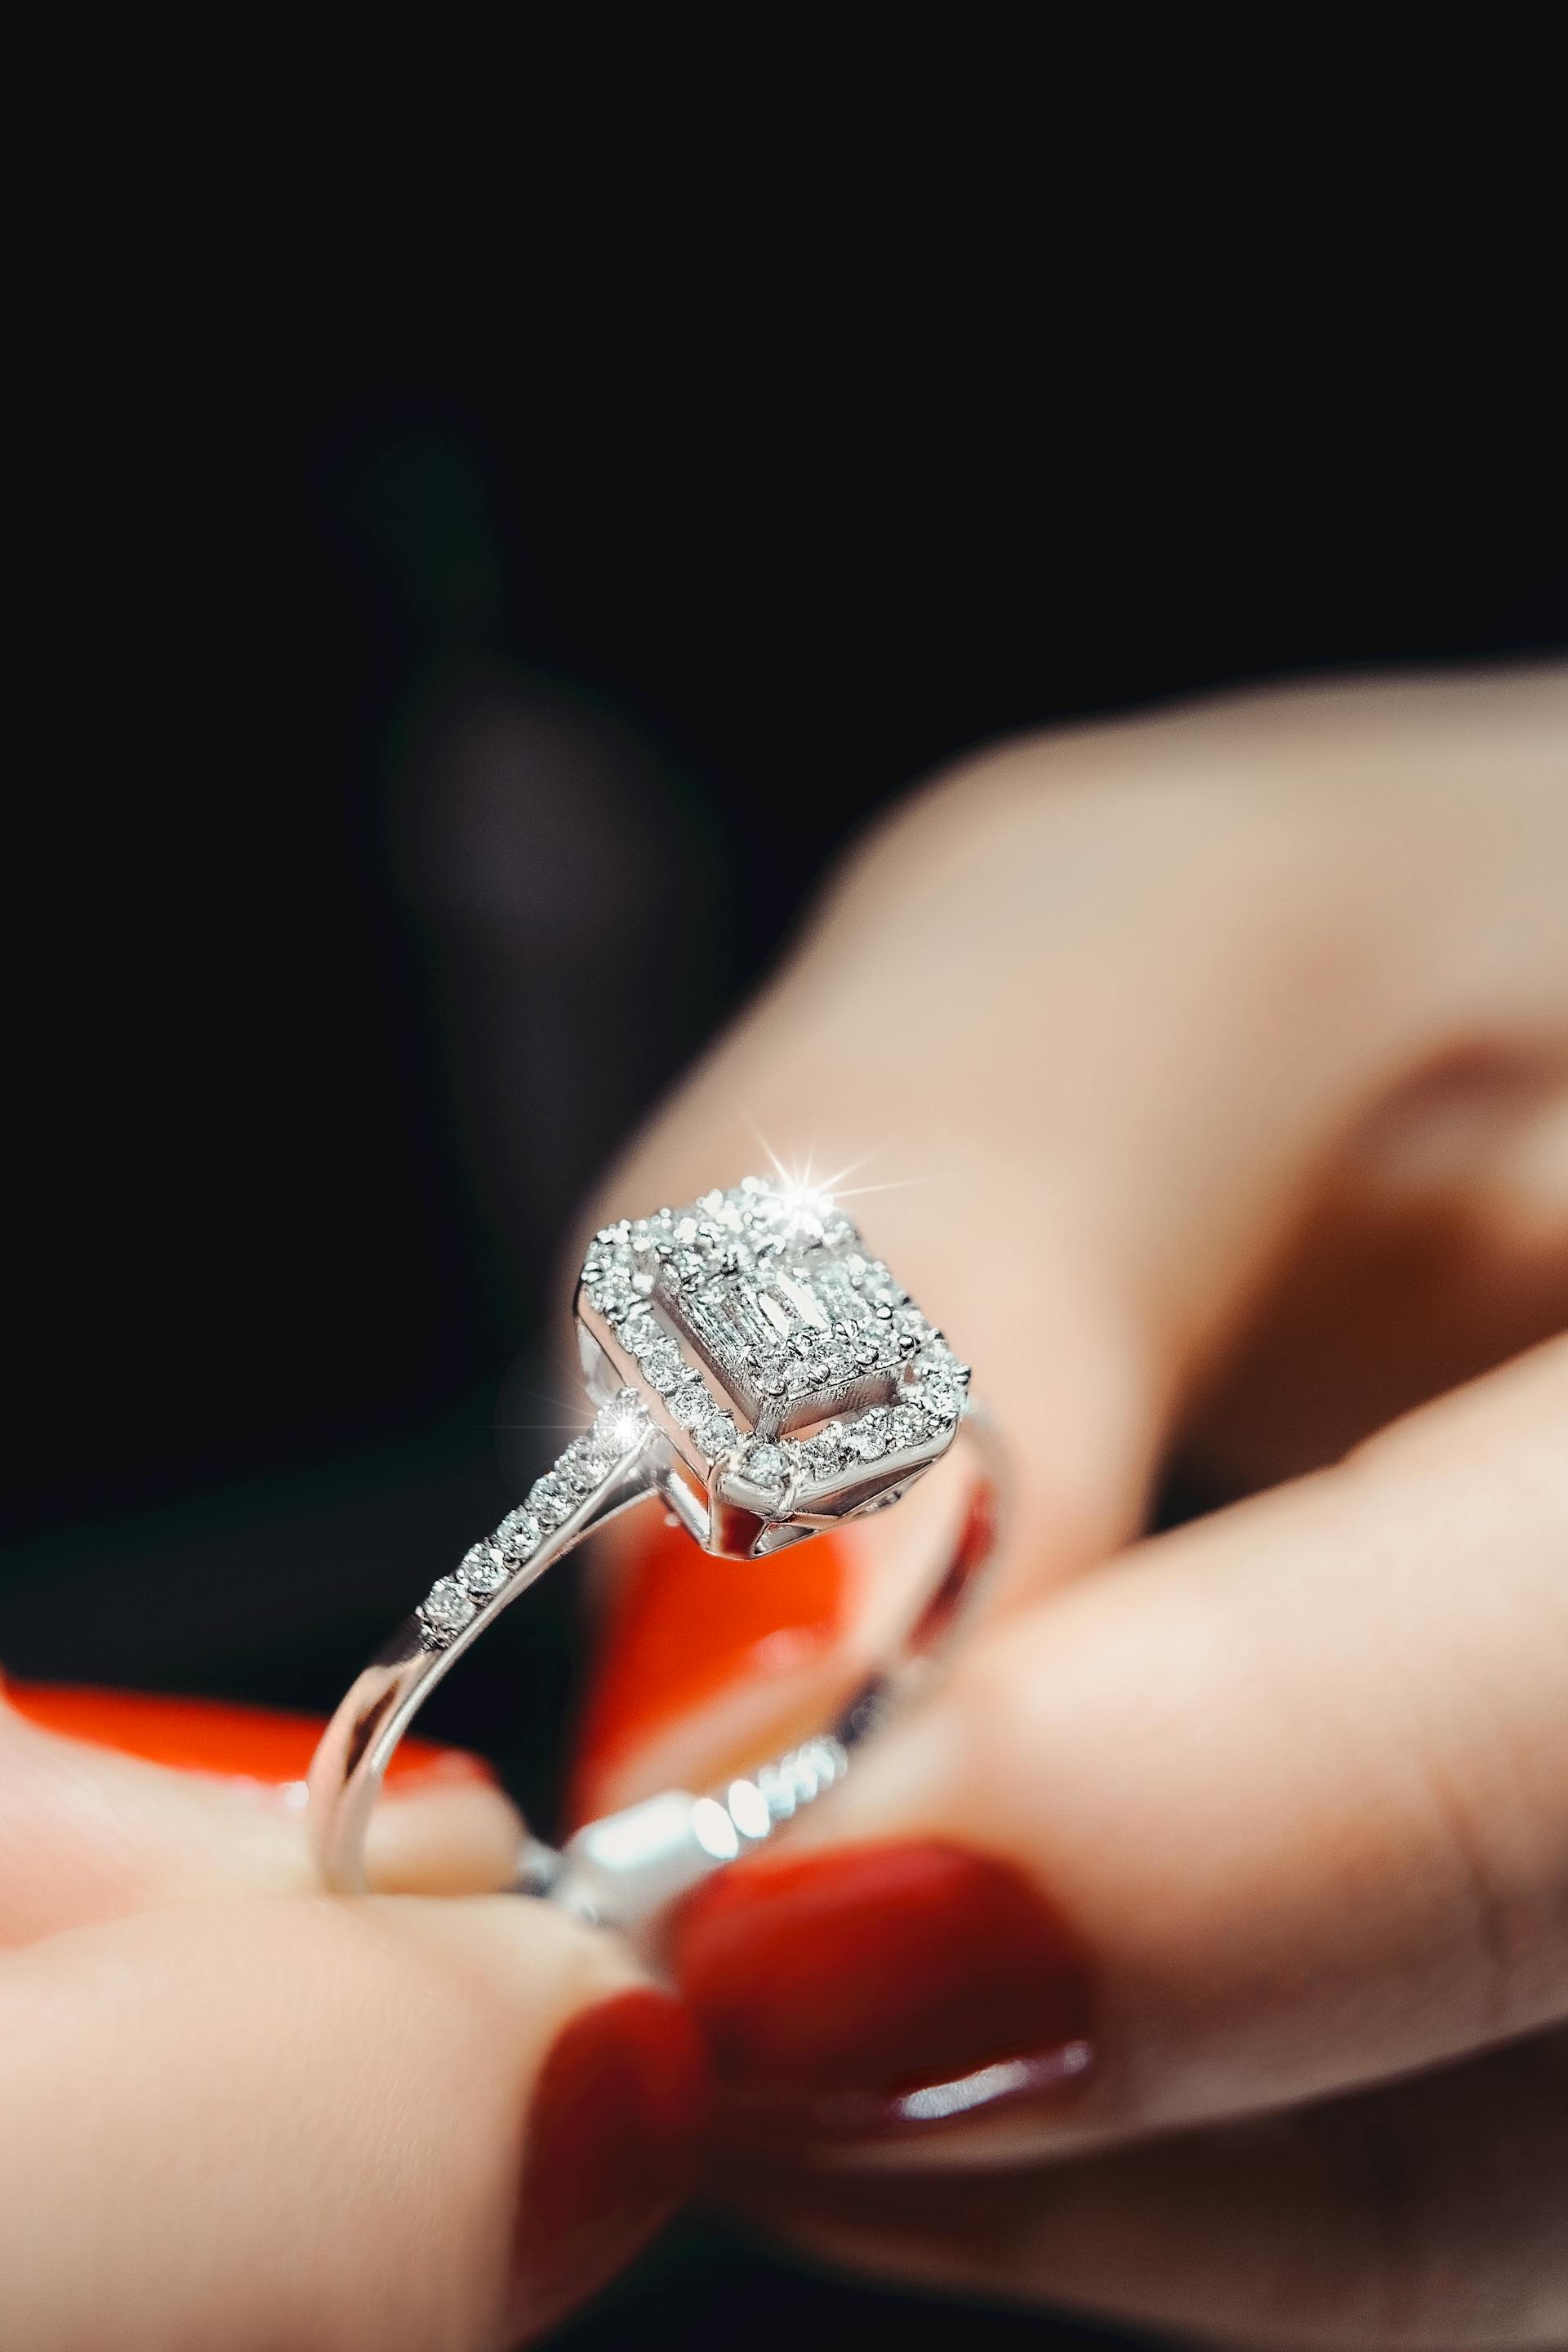 A woman holding a diamond ring | Source: Pexels